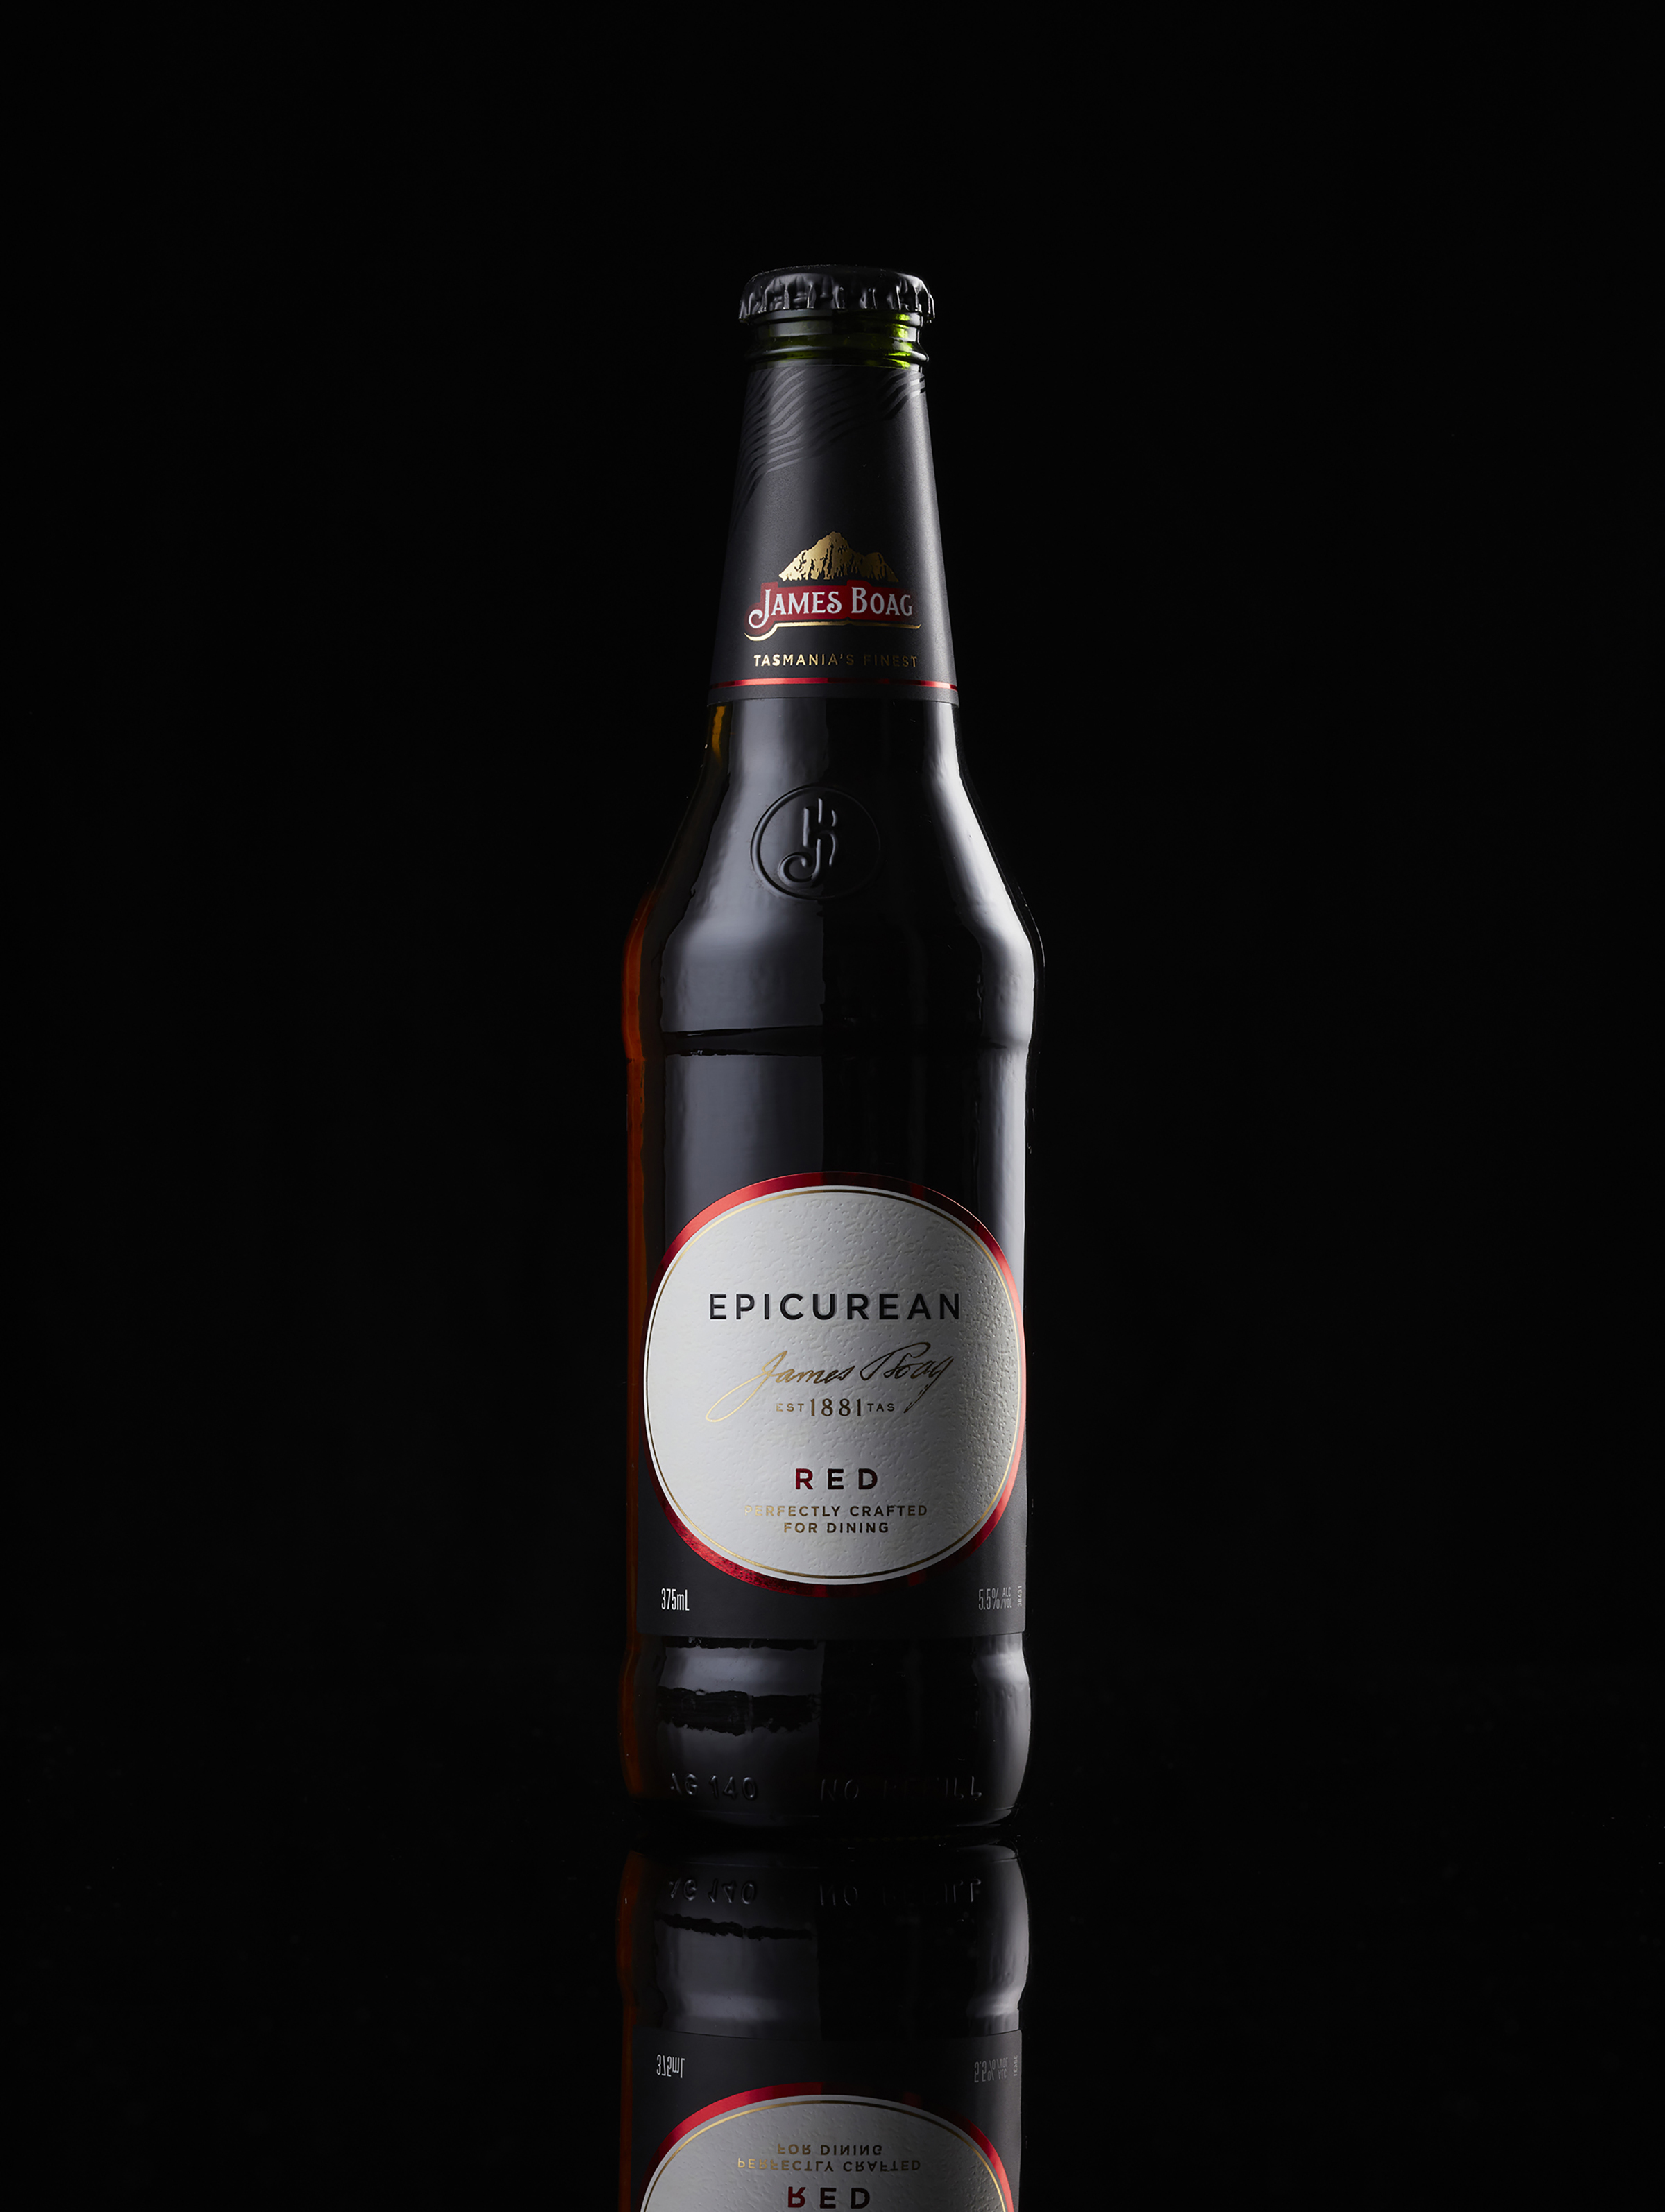 Baker Brand Partnership Create a Fine Beer for Fine Dining for James Boags